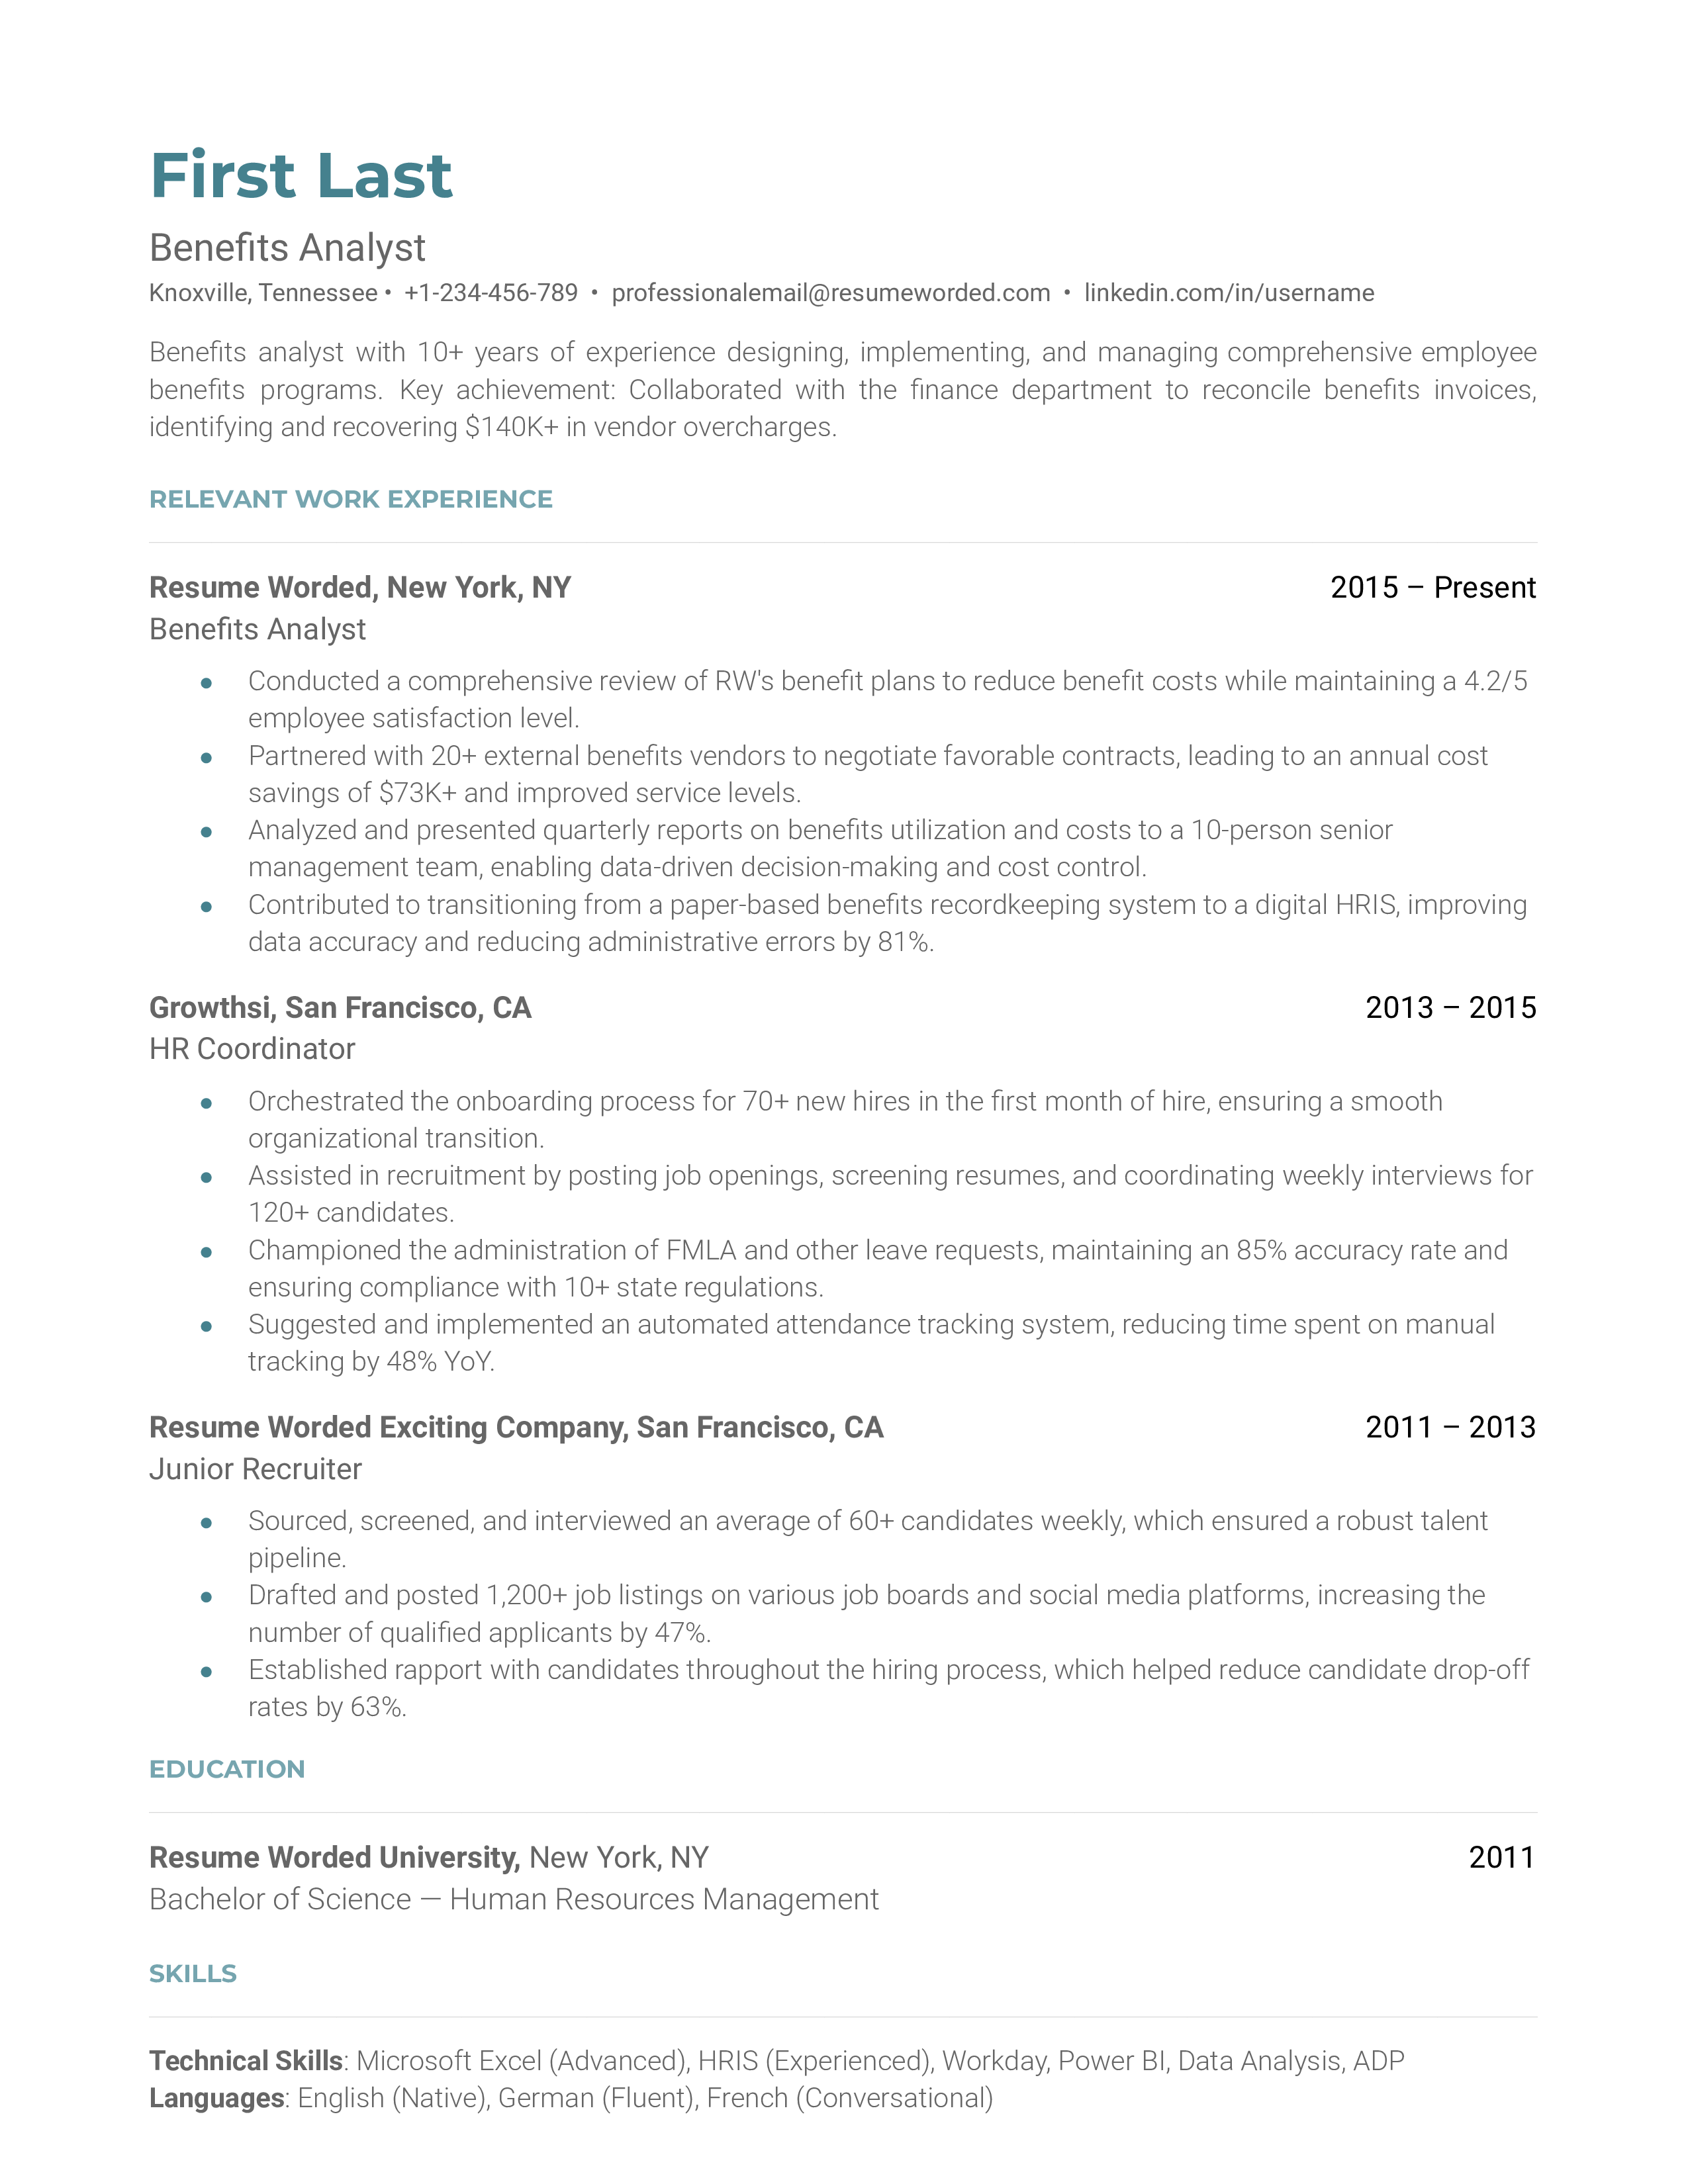 A resume screenshot showcasing relevant experience and skills for a Benefits Analyst role.